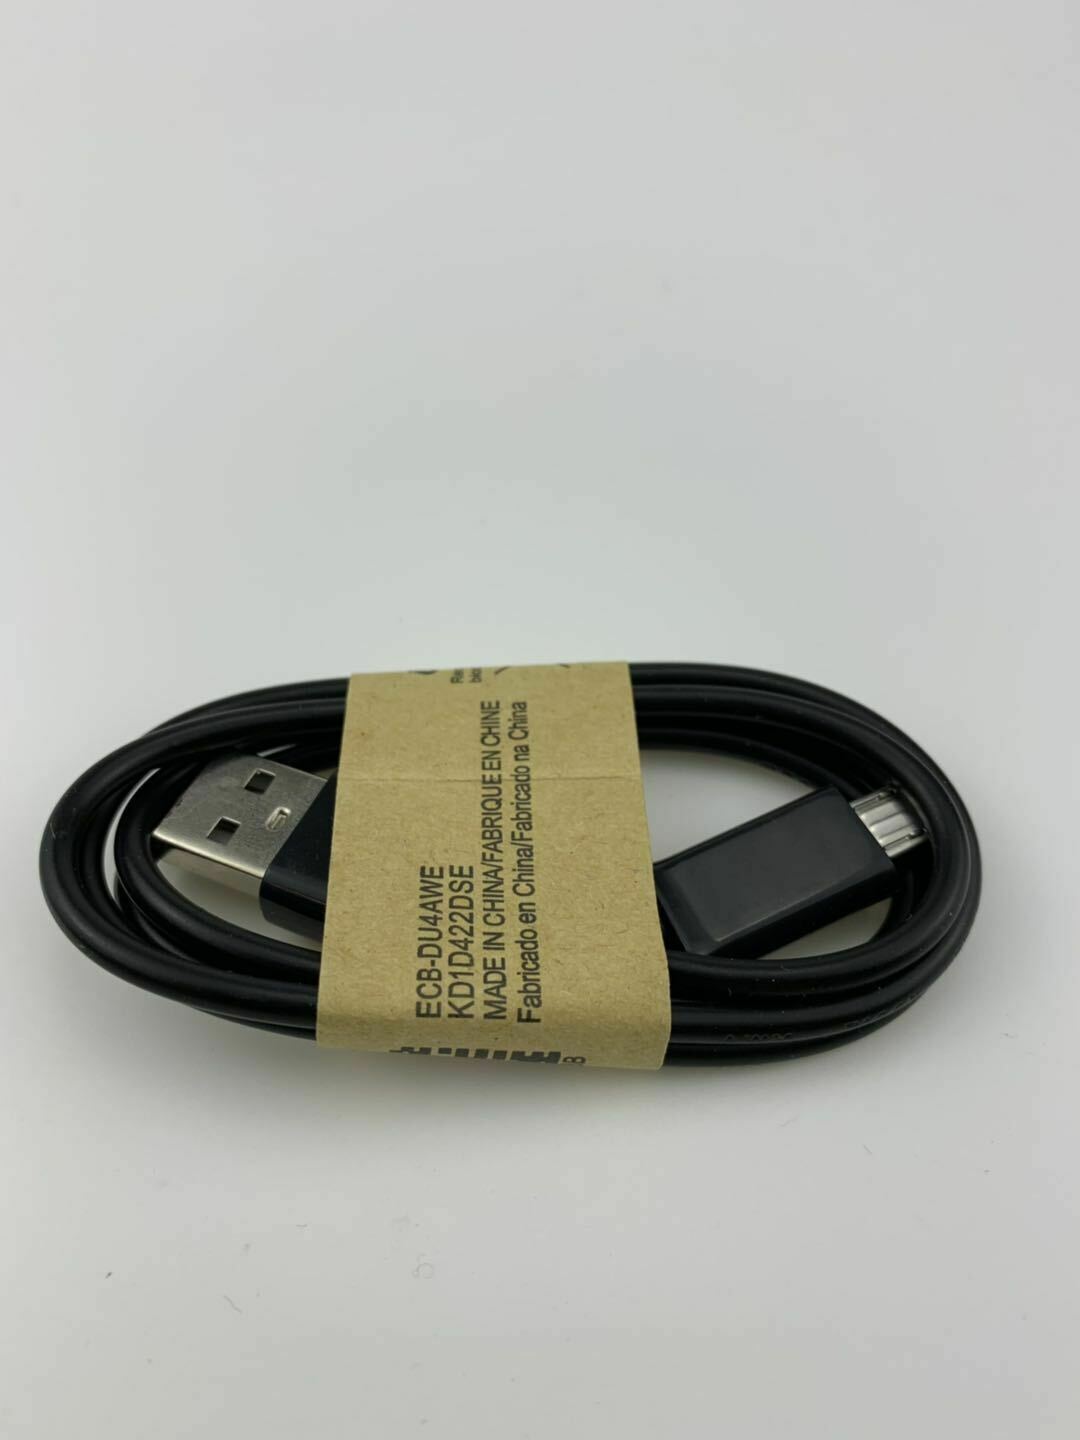 Micro USB Cable - 3ft (20 in a pack) (Promotion) - Black